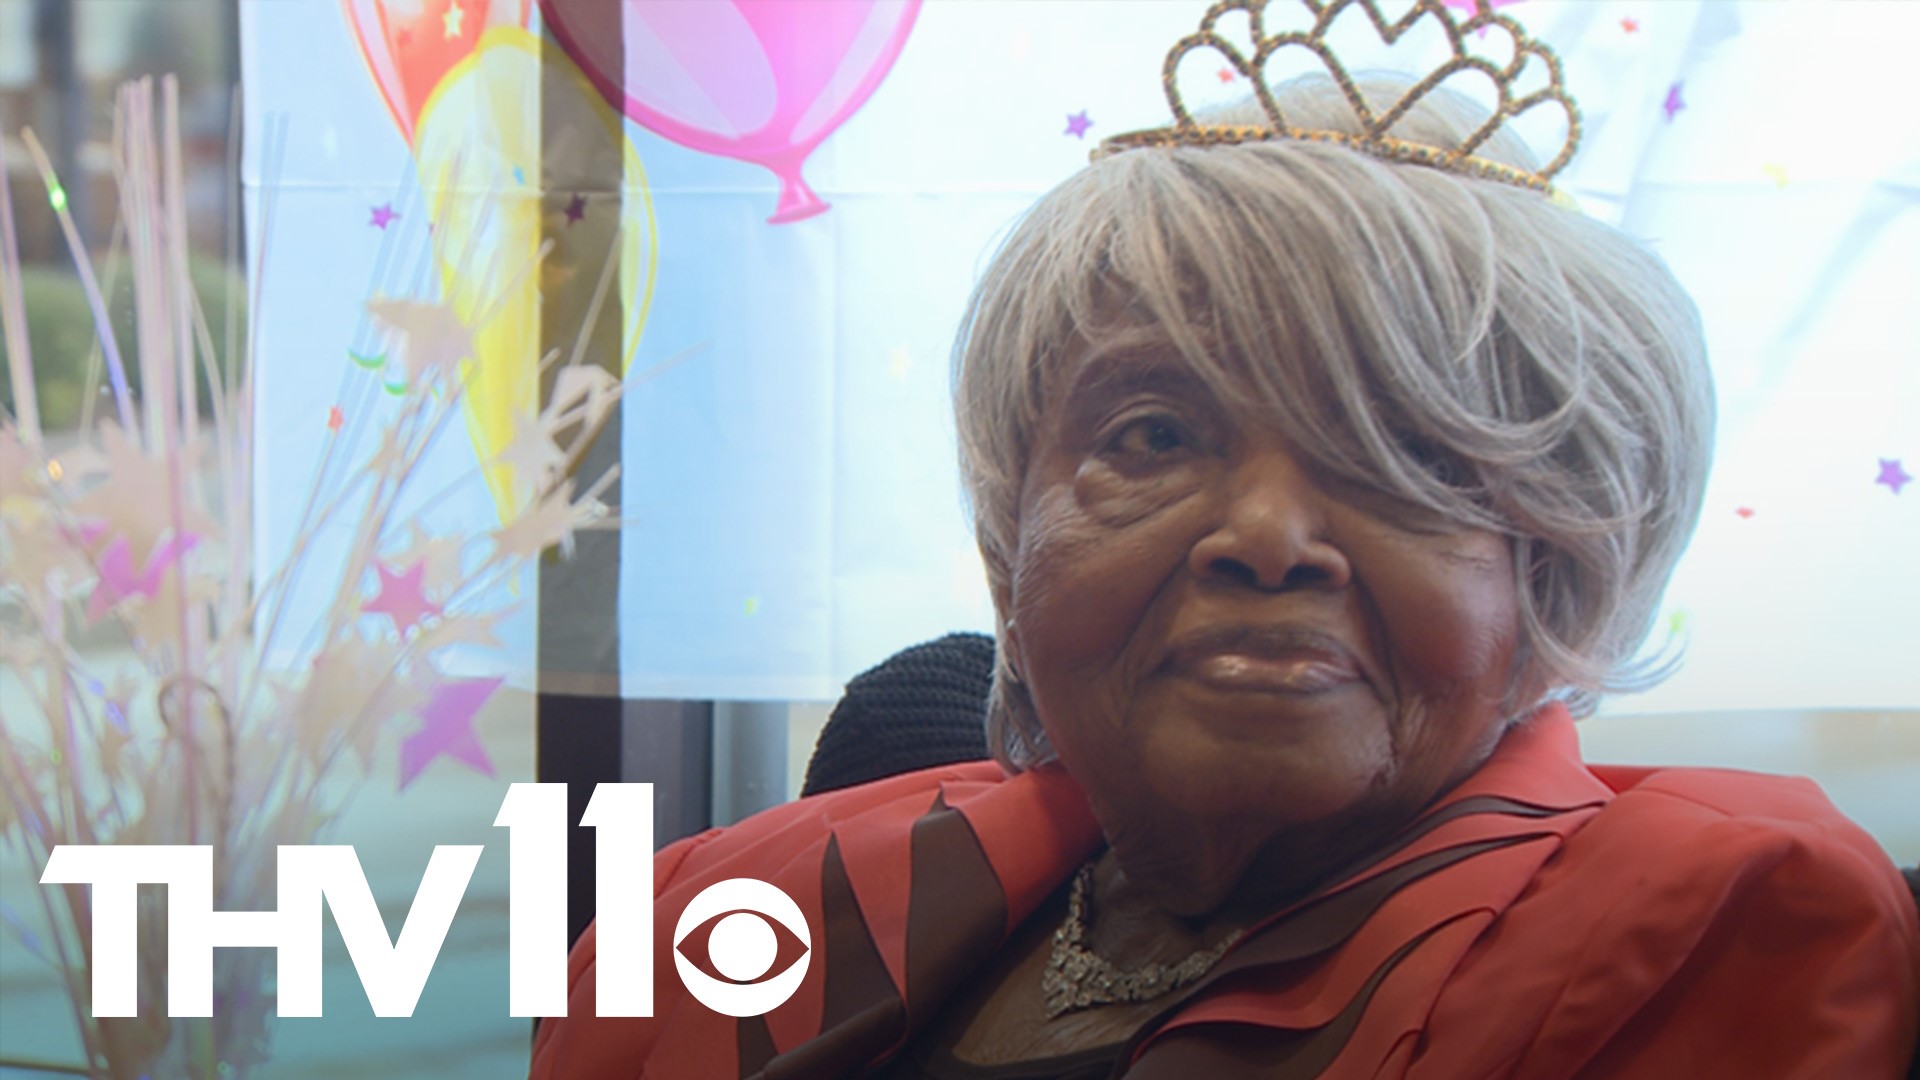 According to Gov. Hutchinson, Priscilla Boyle spent a month in the hospital with COVID-19 in June. She has since turned 106 years old!